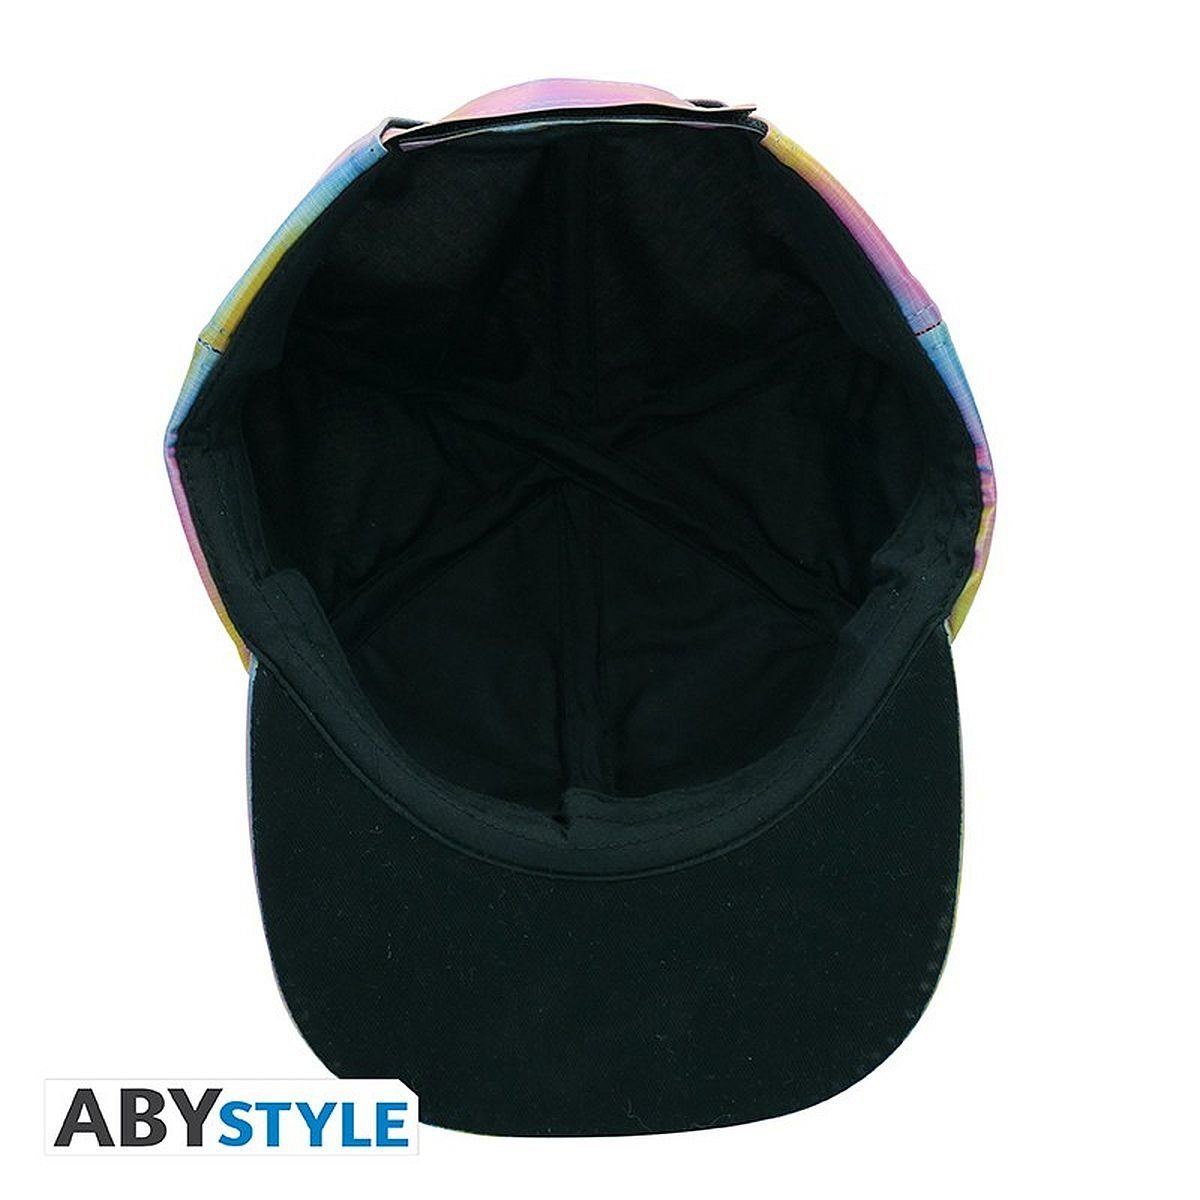 Marty ABYstyle the Zurück Future Back Cap to Zukunft die McFly in Cap Flat